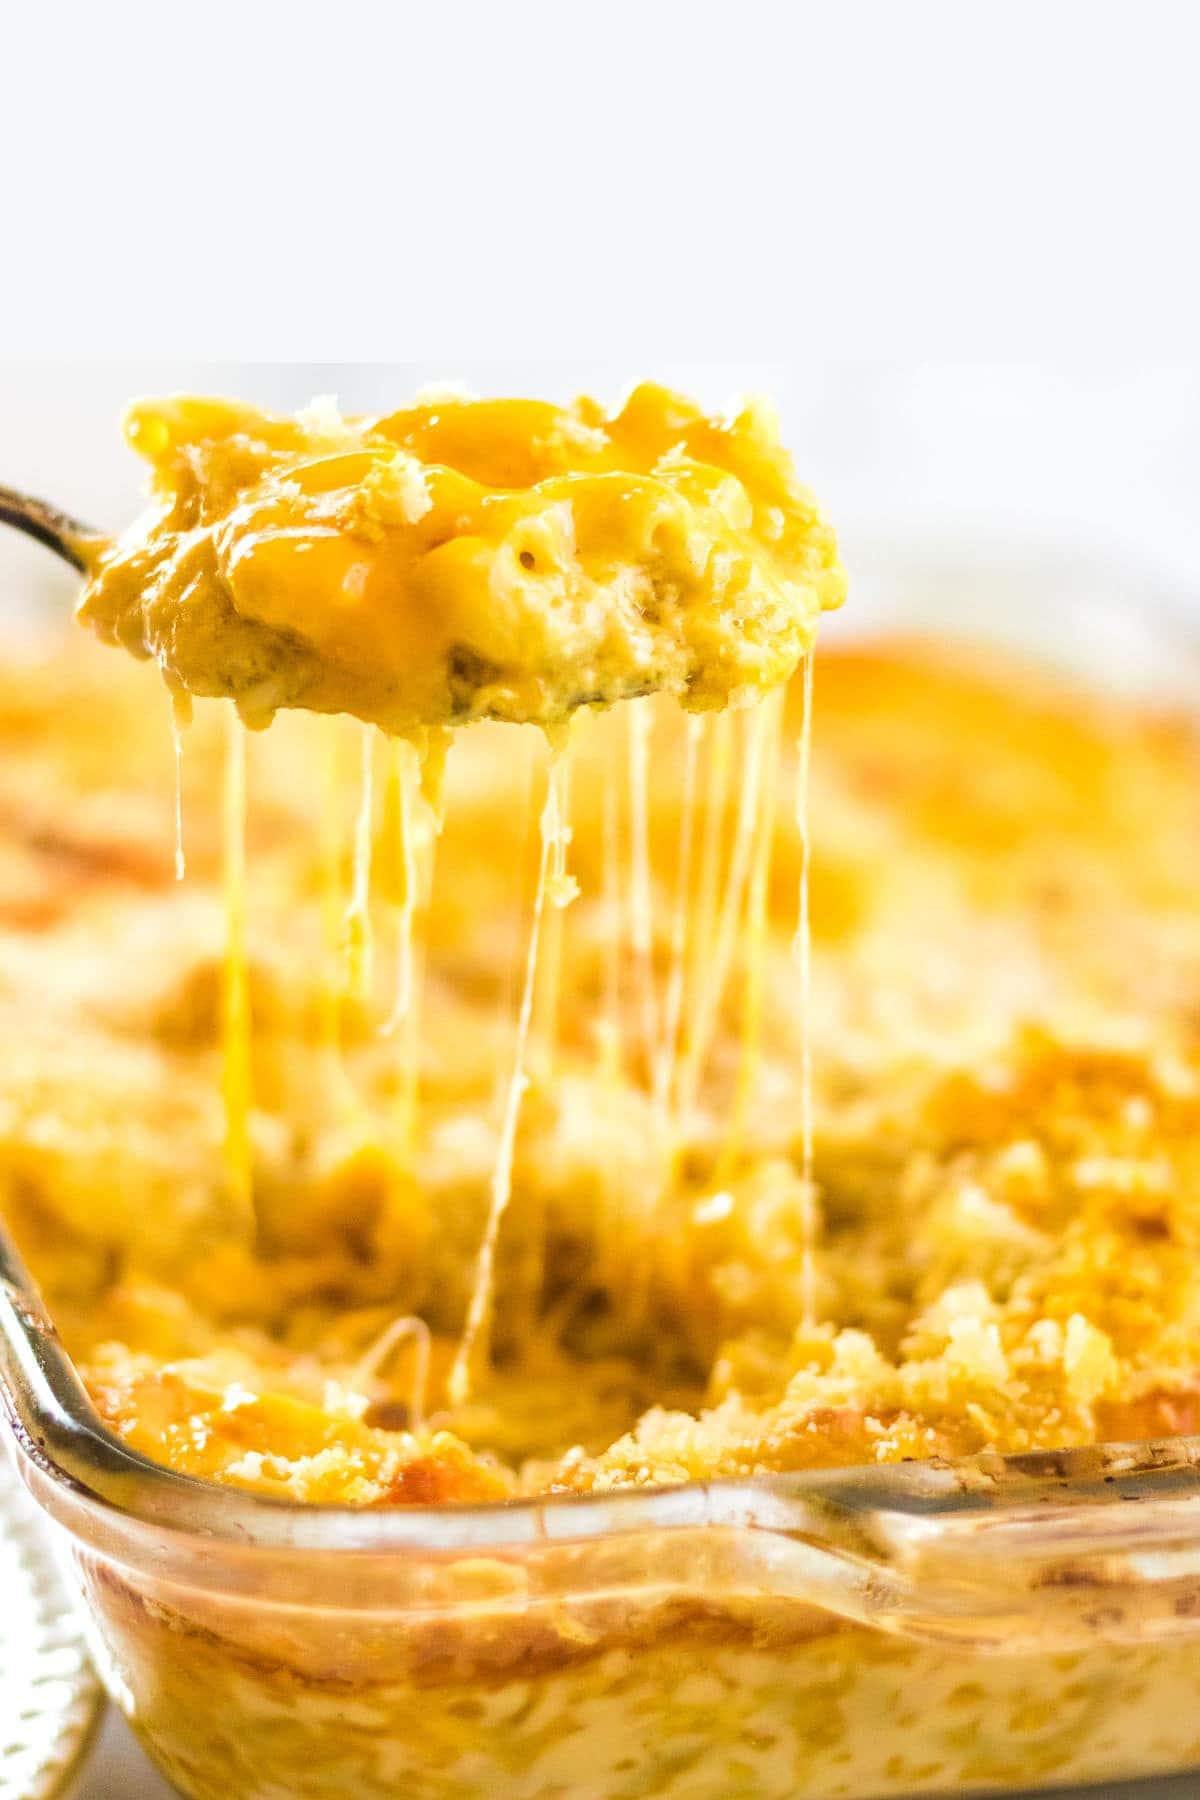 A serving of macaroni and cheese being lifted from the baking dish with melted strings of cheese hanging off the spoon.